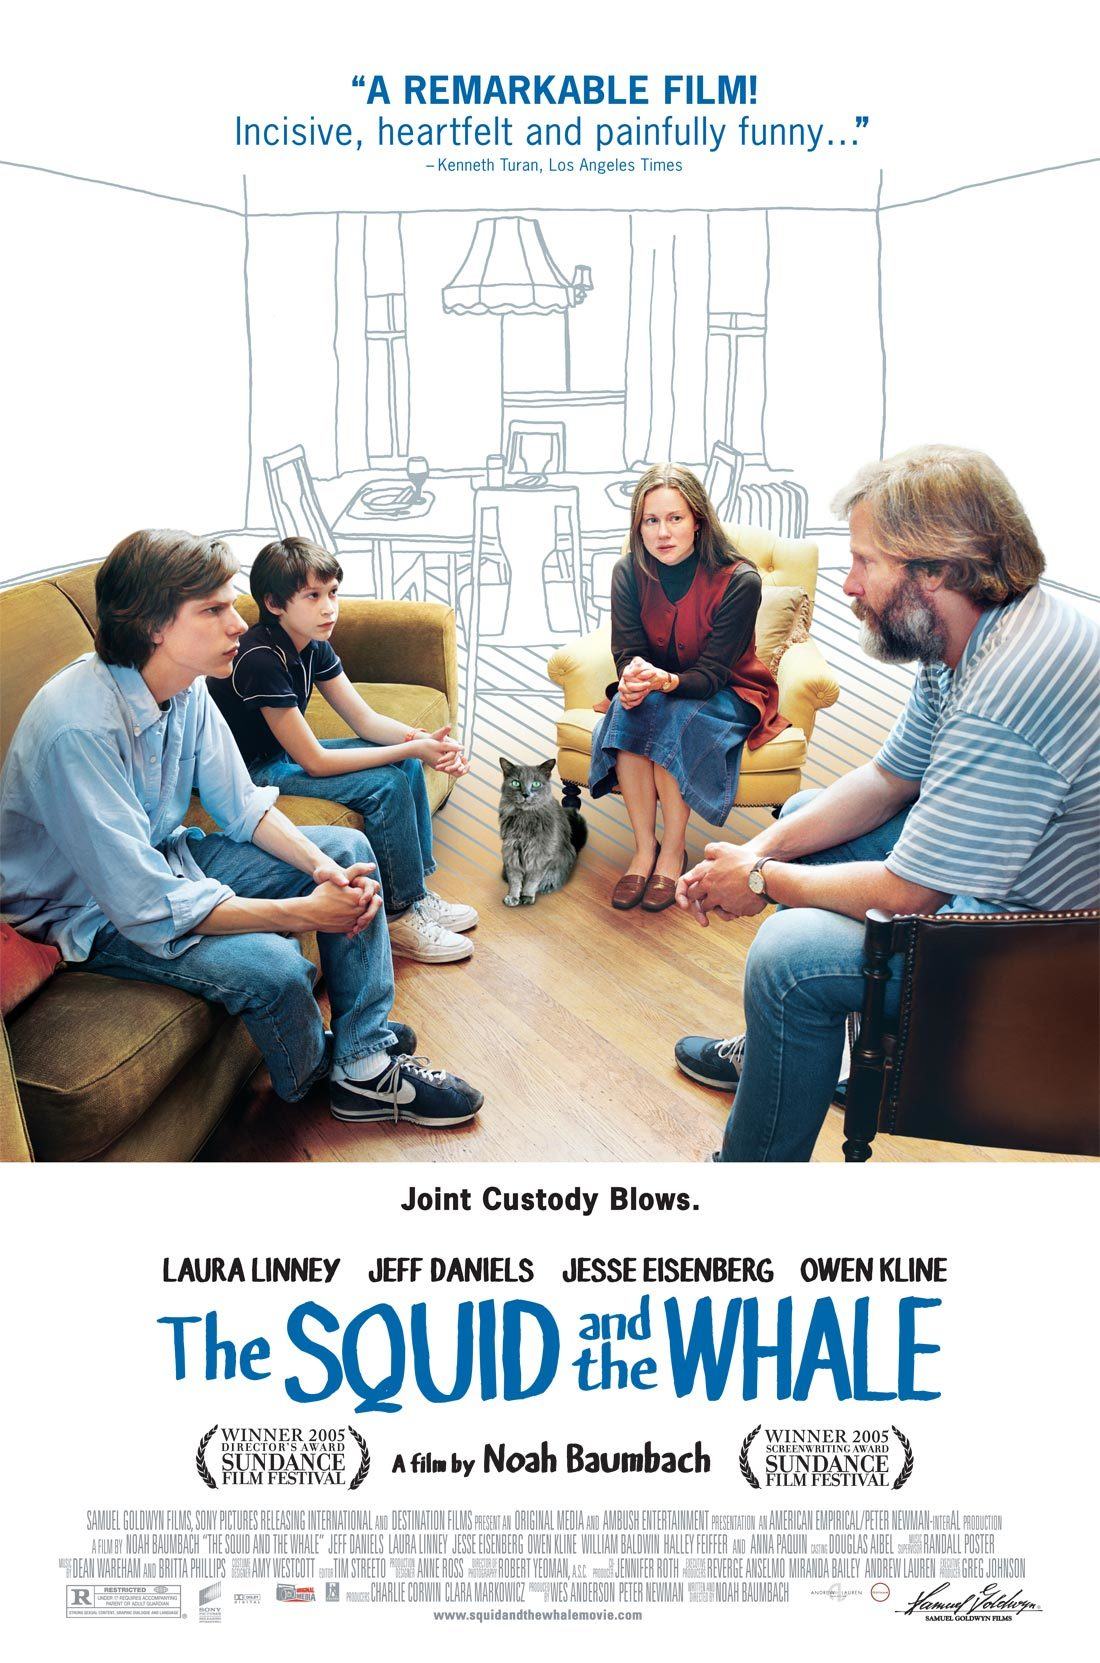 The Squid and the Whale - A Remarkable Movie